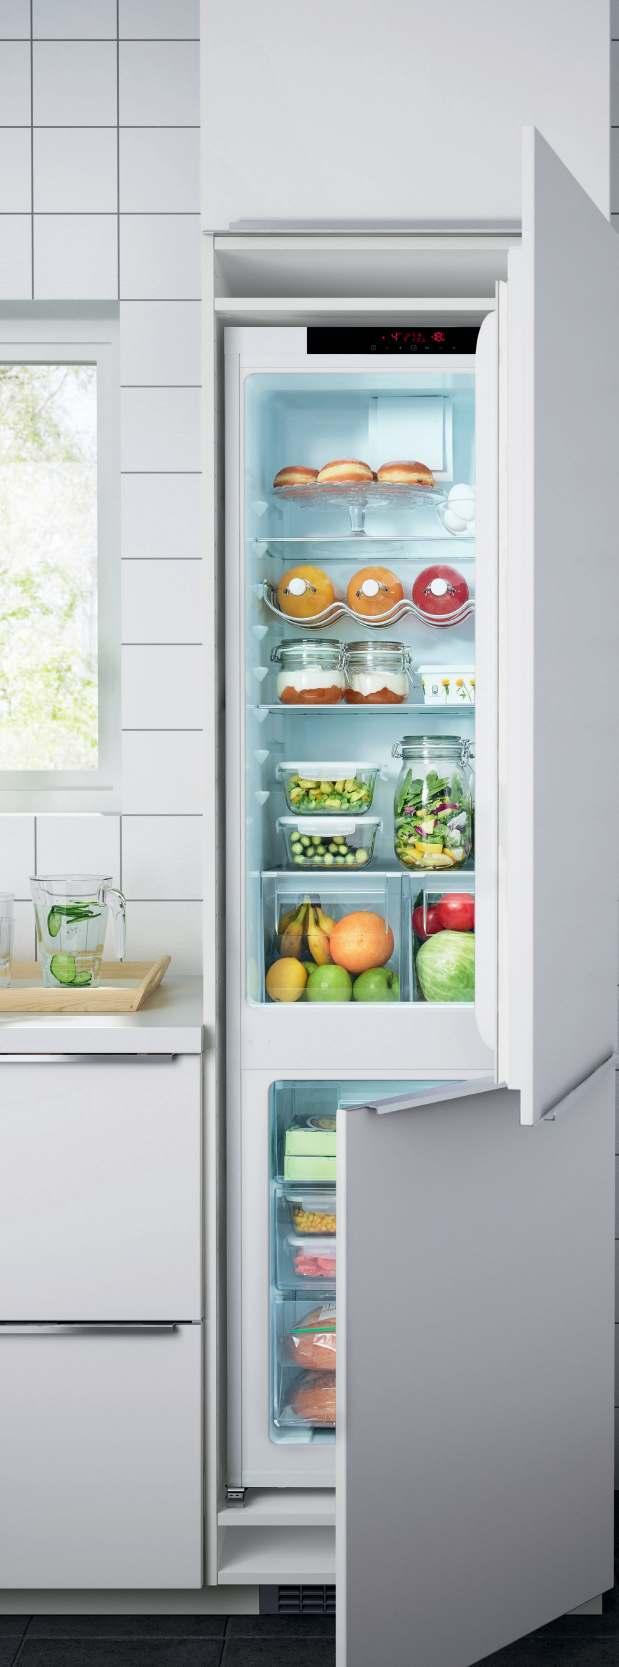 Accessories included: 6 freezer drawers. 1 freezer block. 1 ice cube tray. Technical information: Energy consumption: 237 kwh/year. Defrosting system: Automatic.